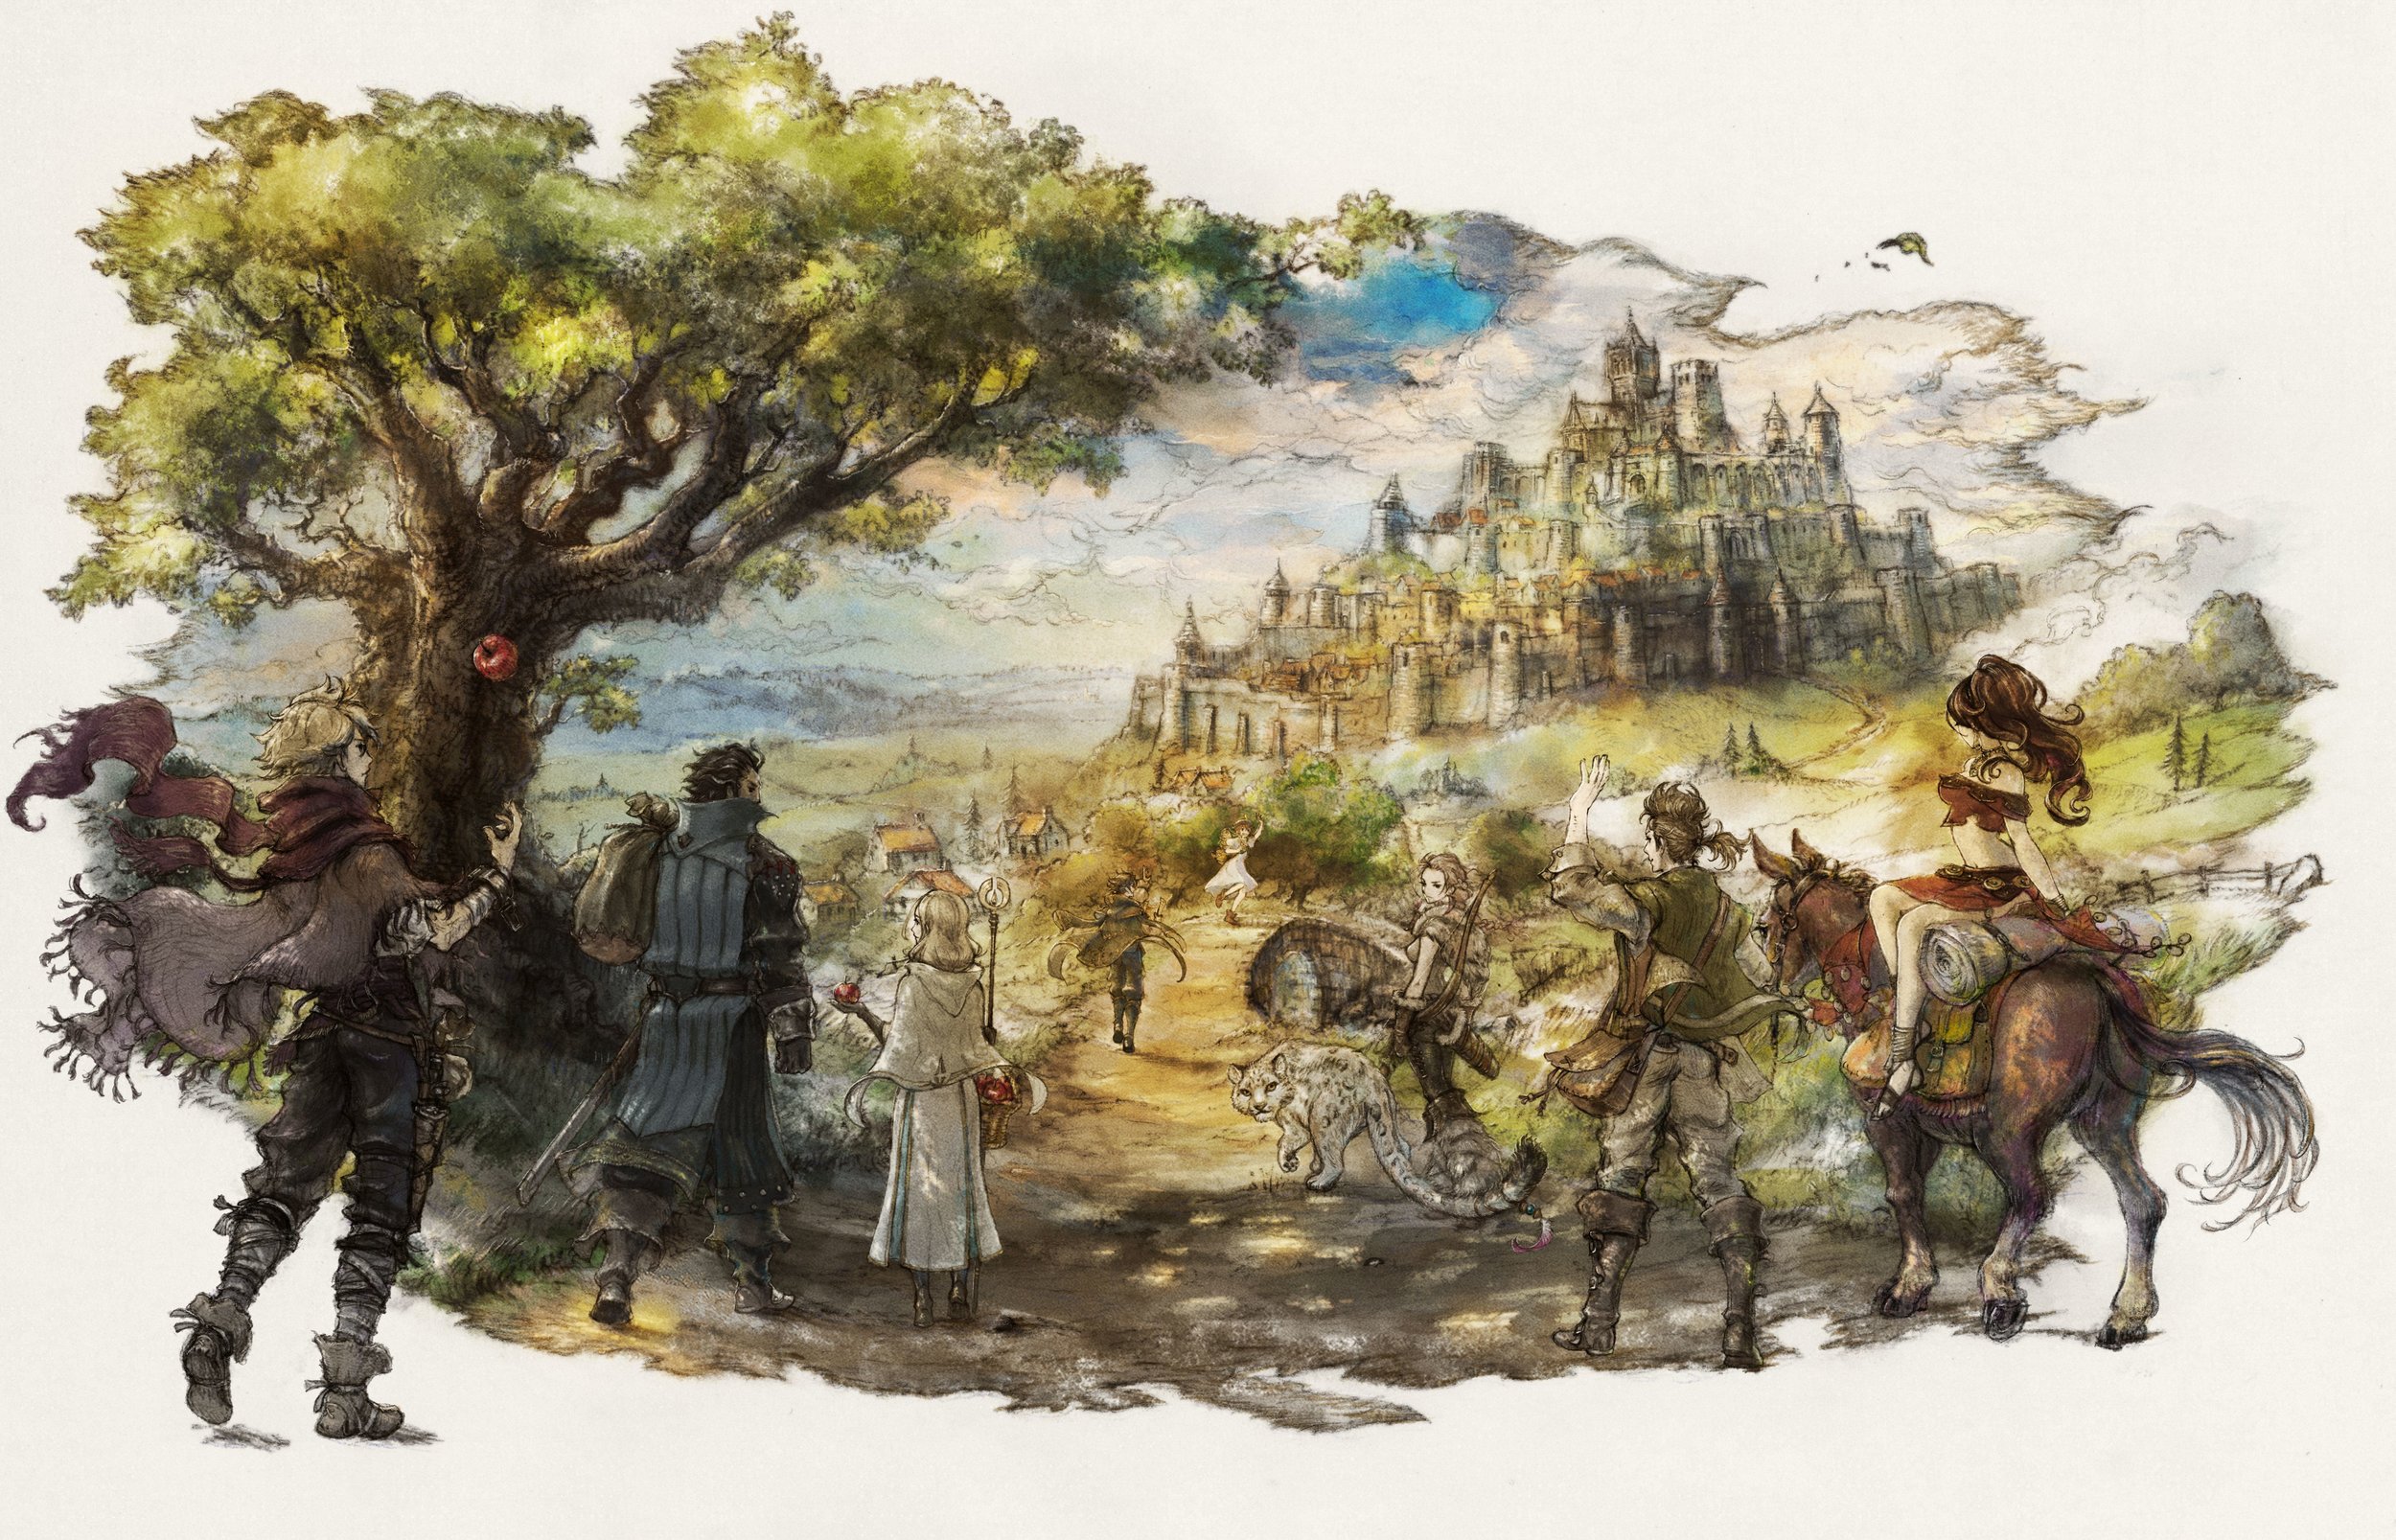 Octopath Traveler 2 review: a retro-inspired JRPG with soul